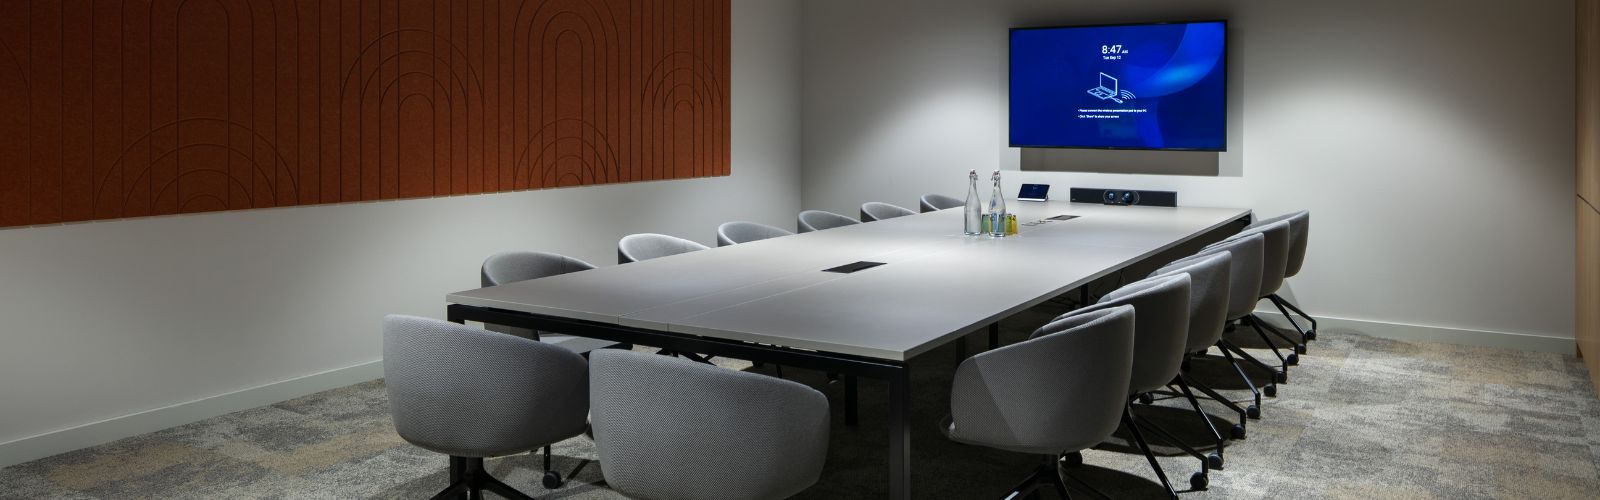 Conference room utilising technology for professional video calling